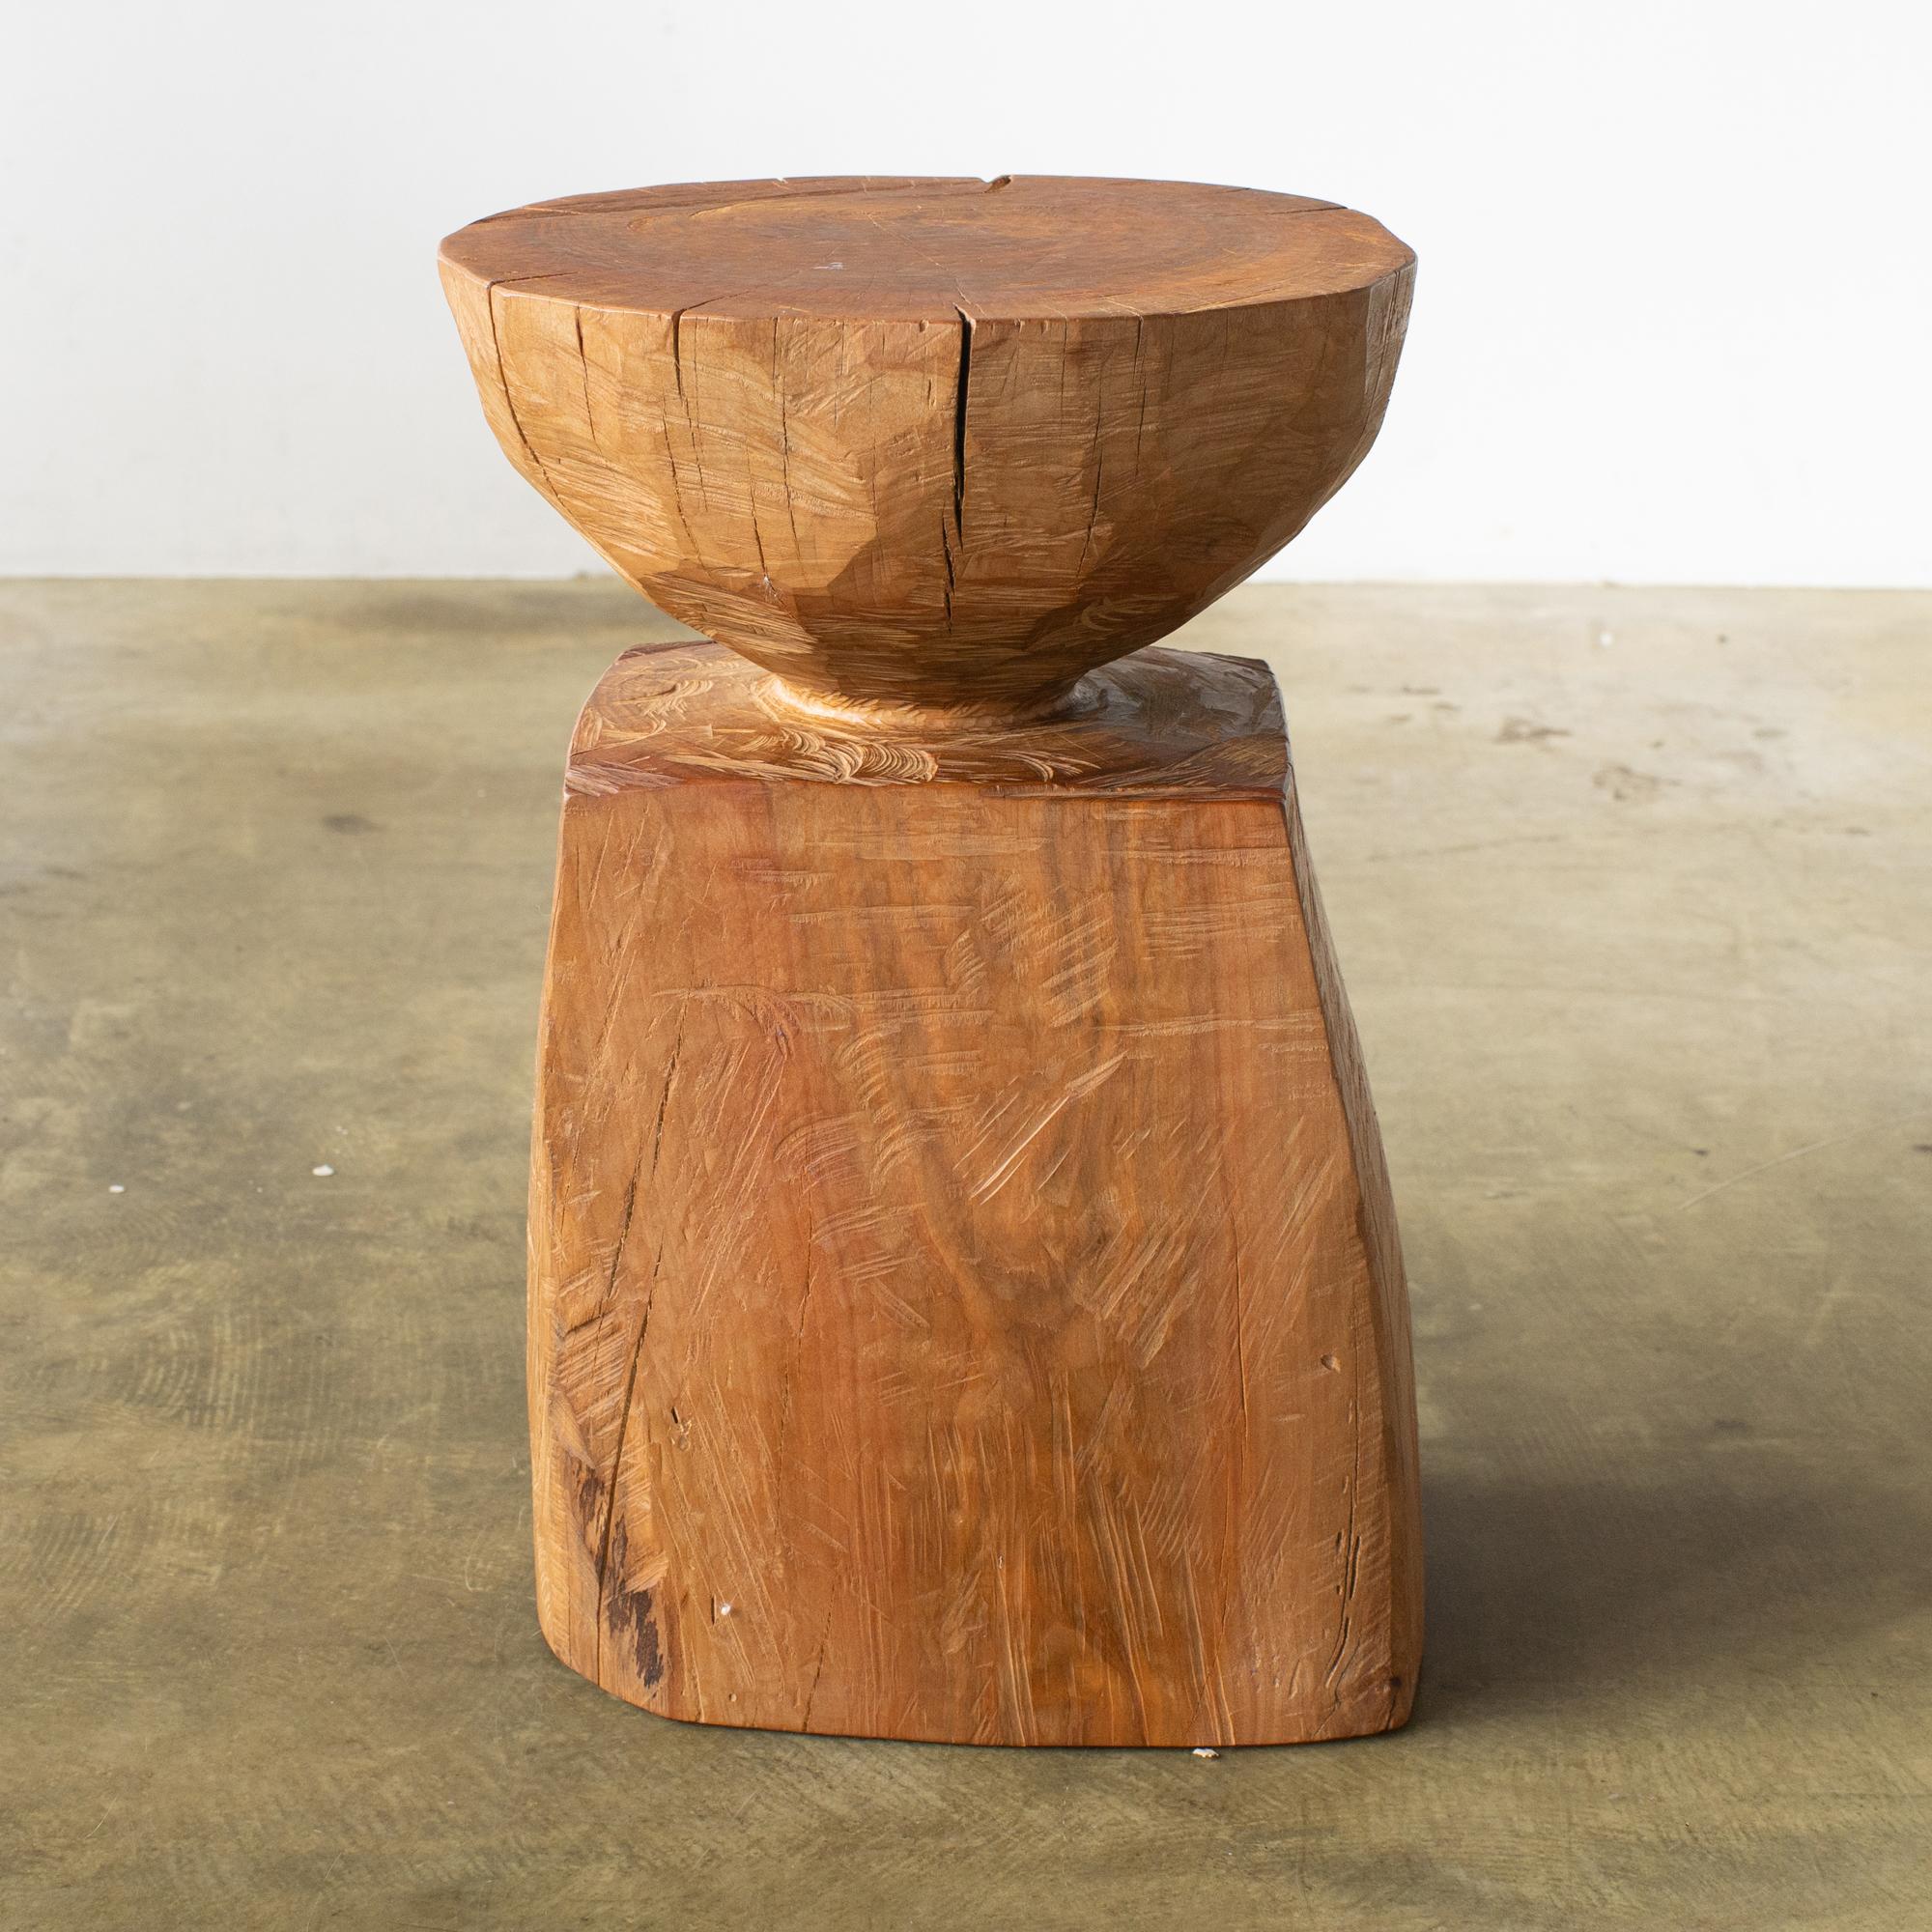 Name: Boy
Sculptural stool by Zogei carved furniture
Material: Cherry
This work is carved from log with some kinds of chainsaws.
Most of wood used for Nishimura's works are unable to use anything, these woods are unsuitable material for